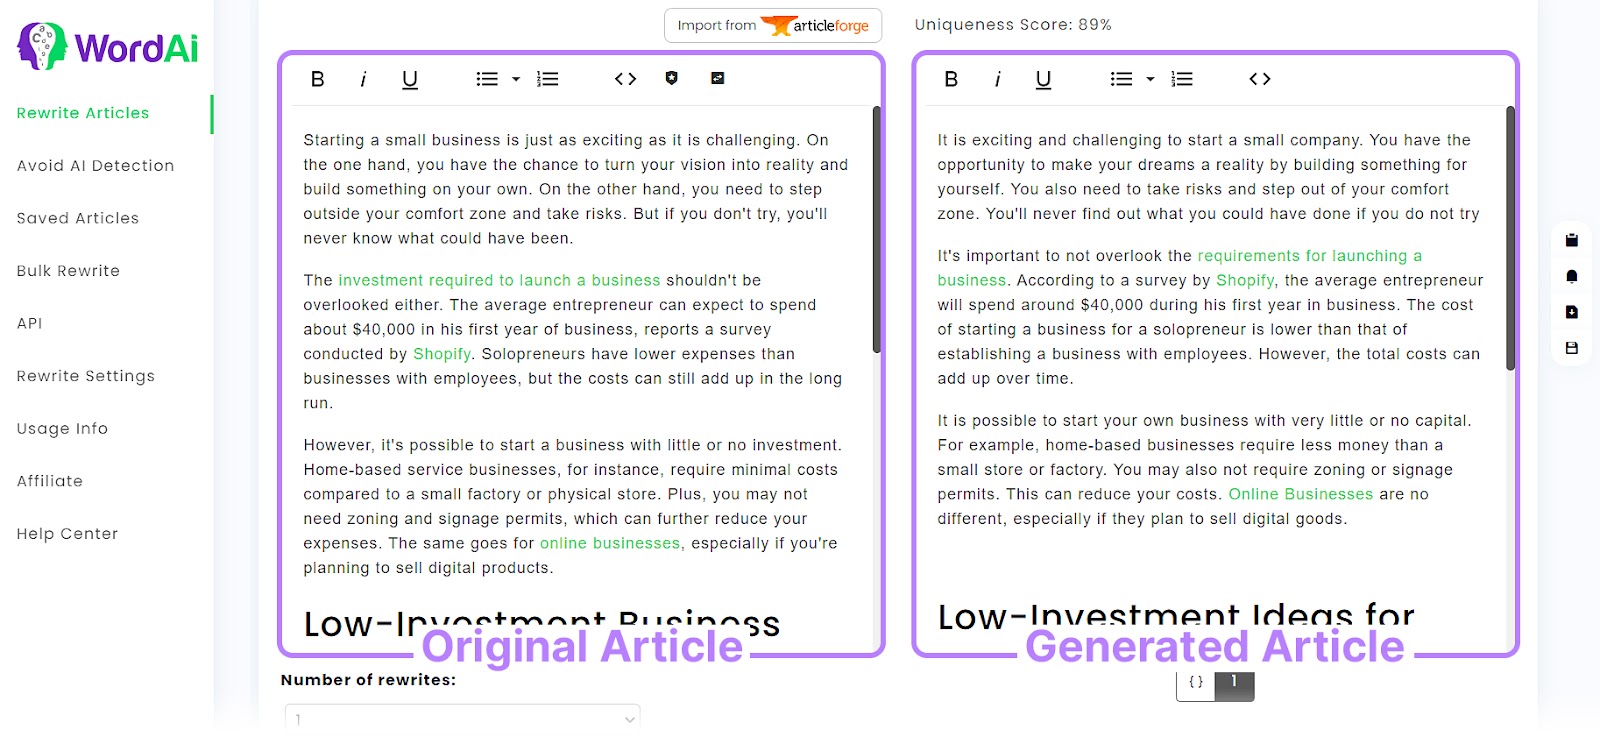 An original article (left) and generated article (right) in WordAI